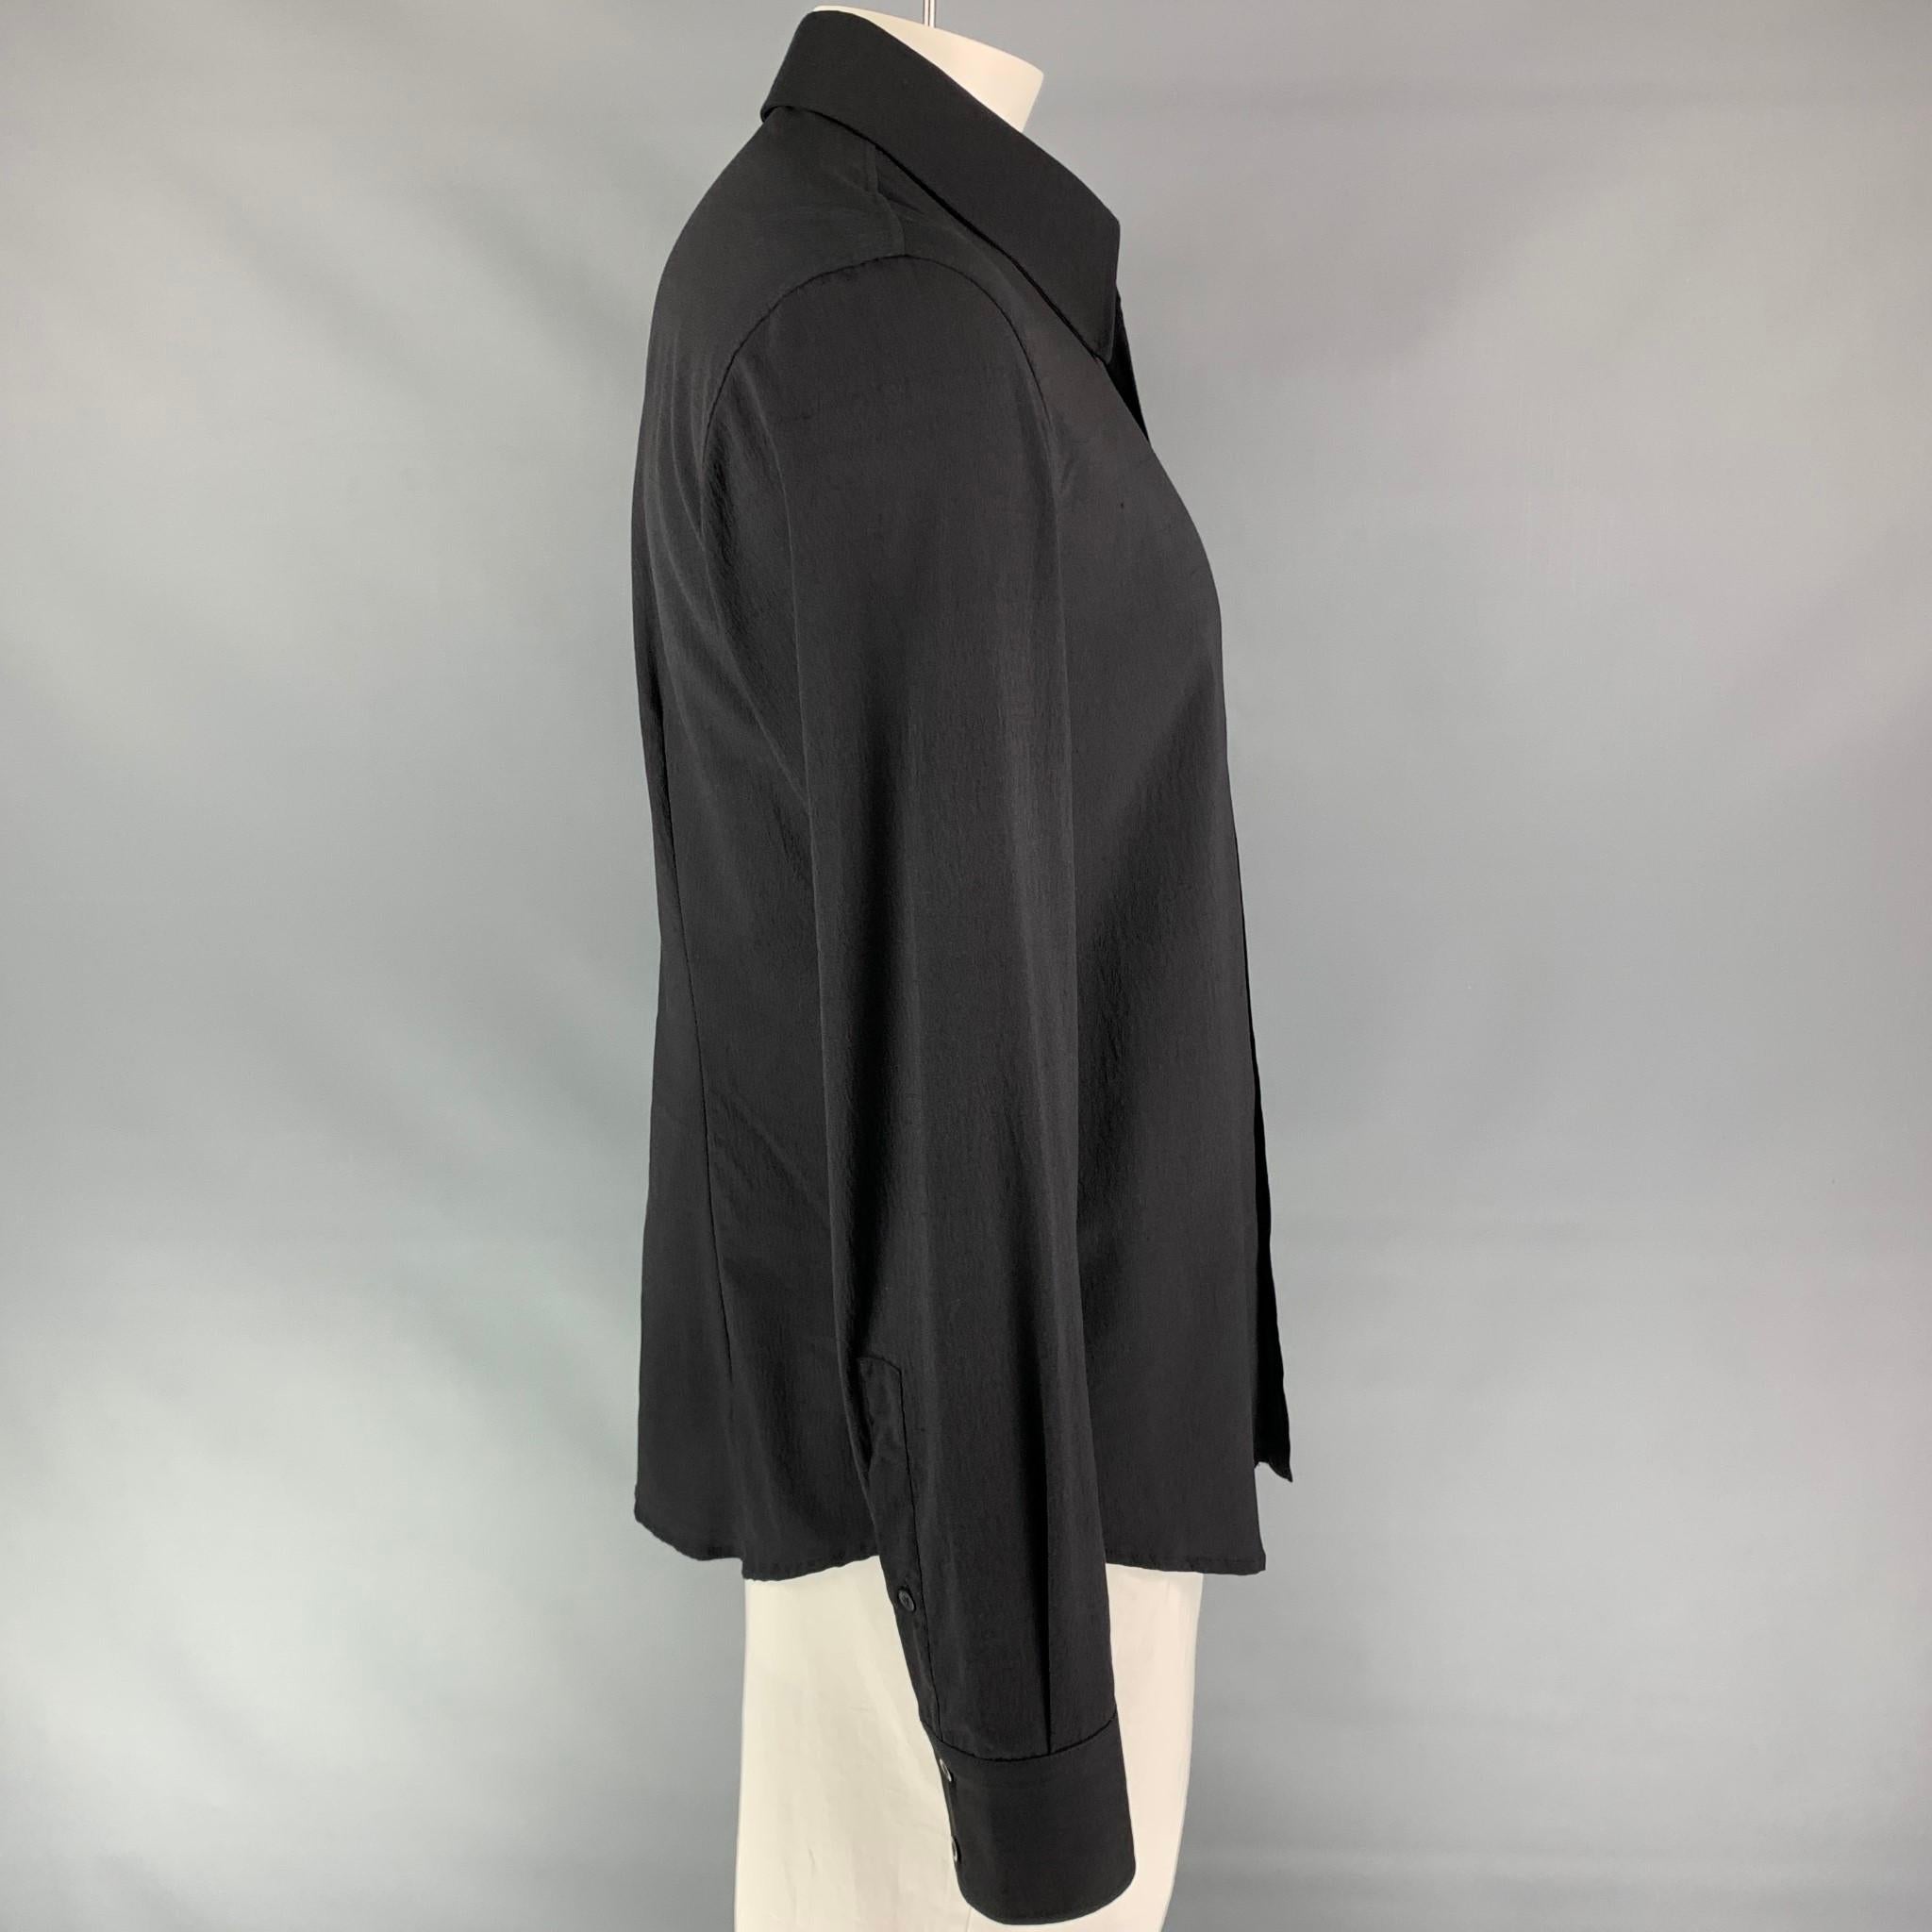 JUST CAVALLI long sleeve shirt comes in a black silk featuring a braided leather trim, spread up, and a button up closure. Made in Italy.

Very Good Pre-Owned Condition.
Marked: 54

Measurements:

Shoulder: 20 in.
Chest: 44 in.
Sleeve: 28